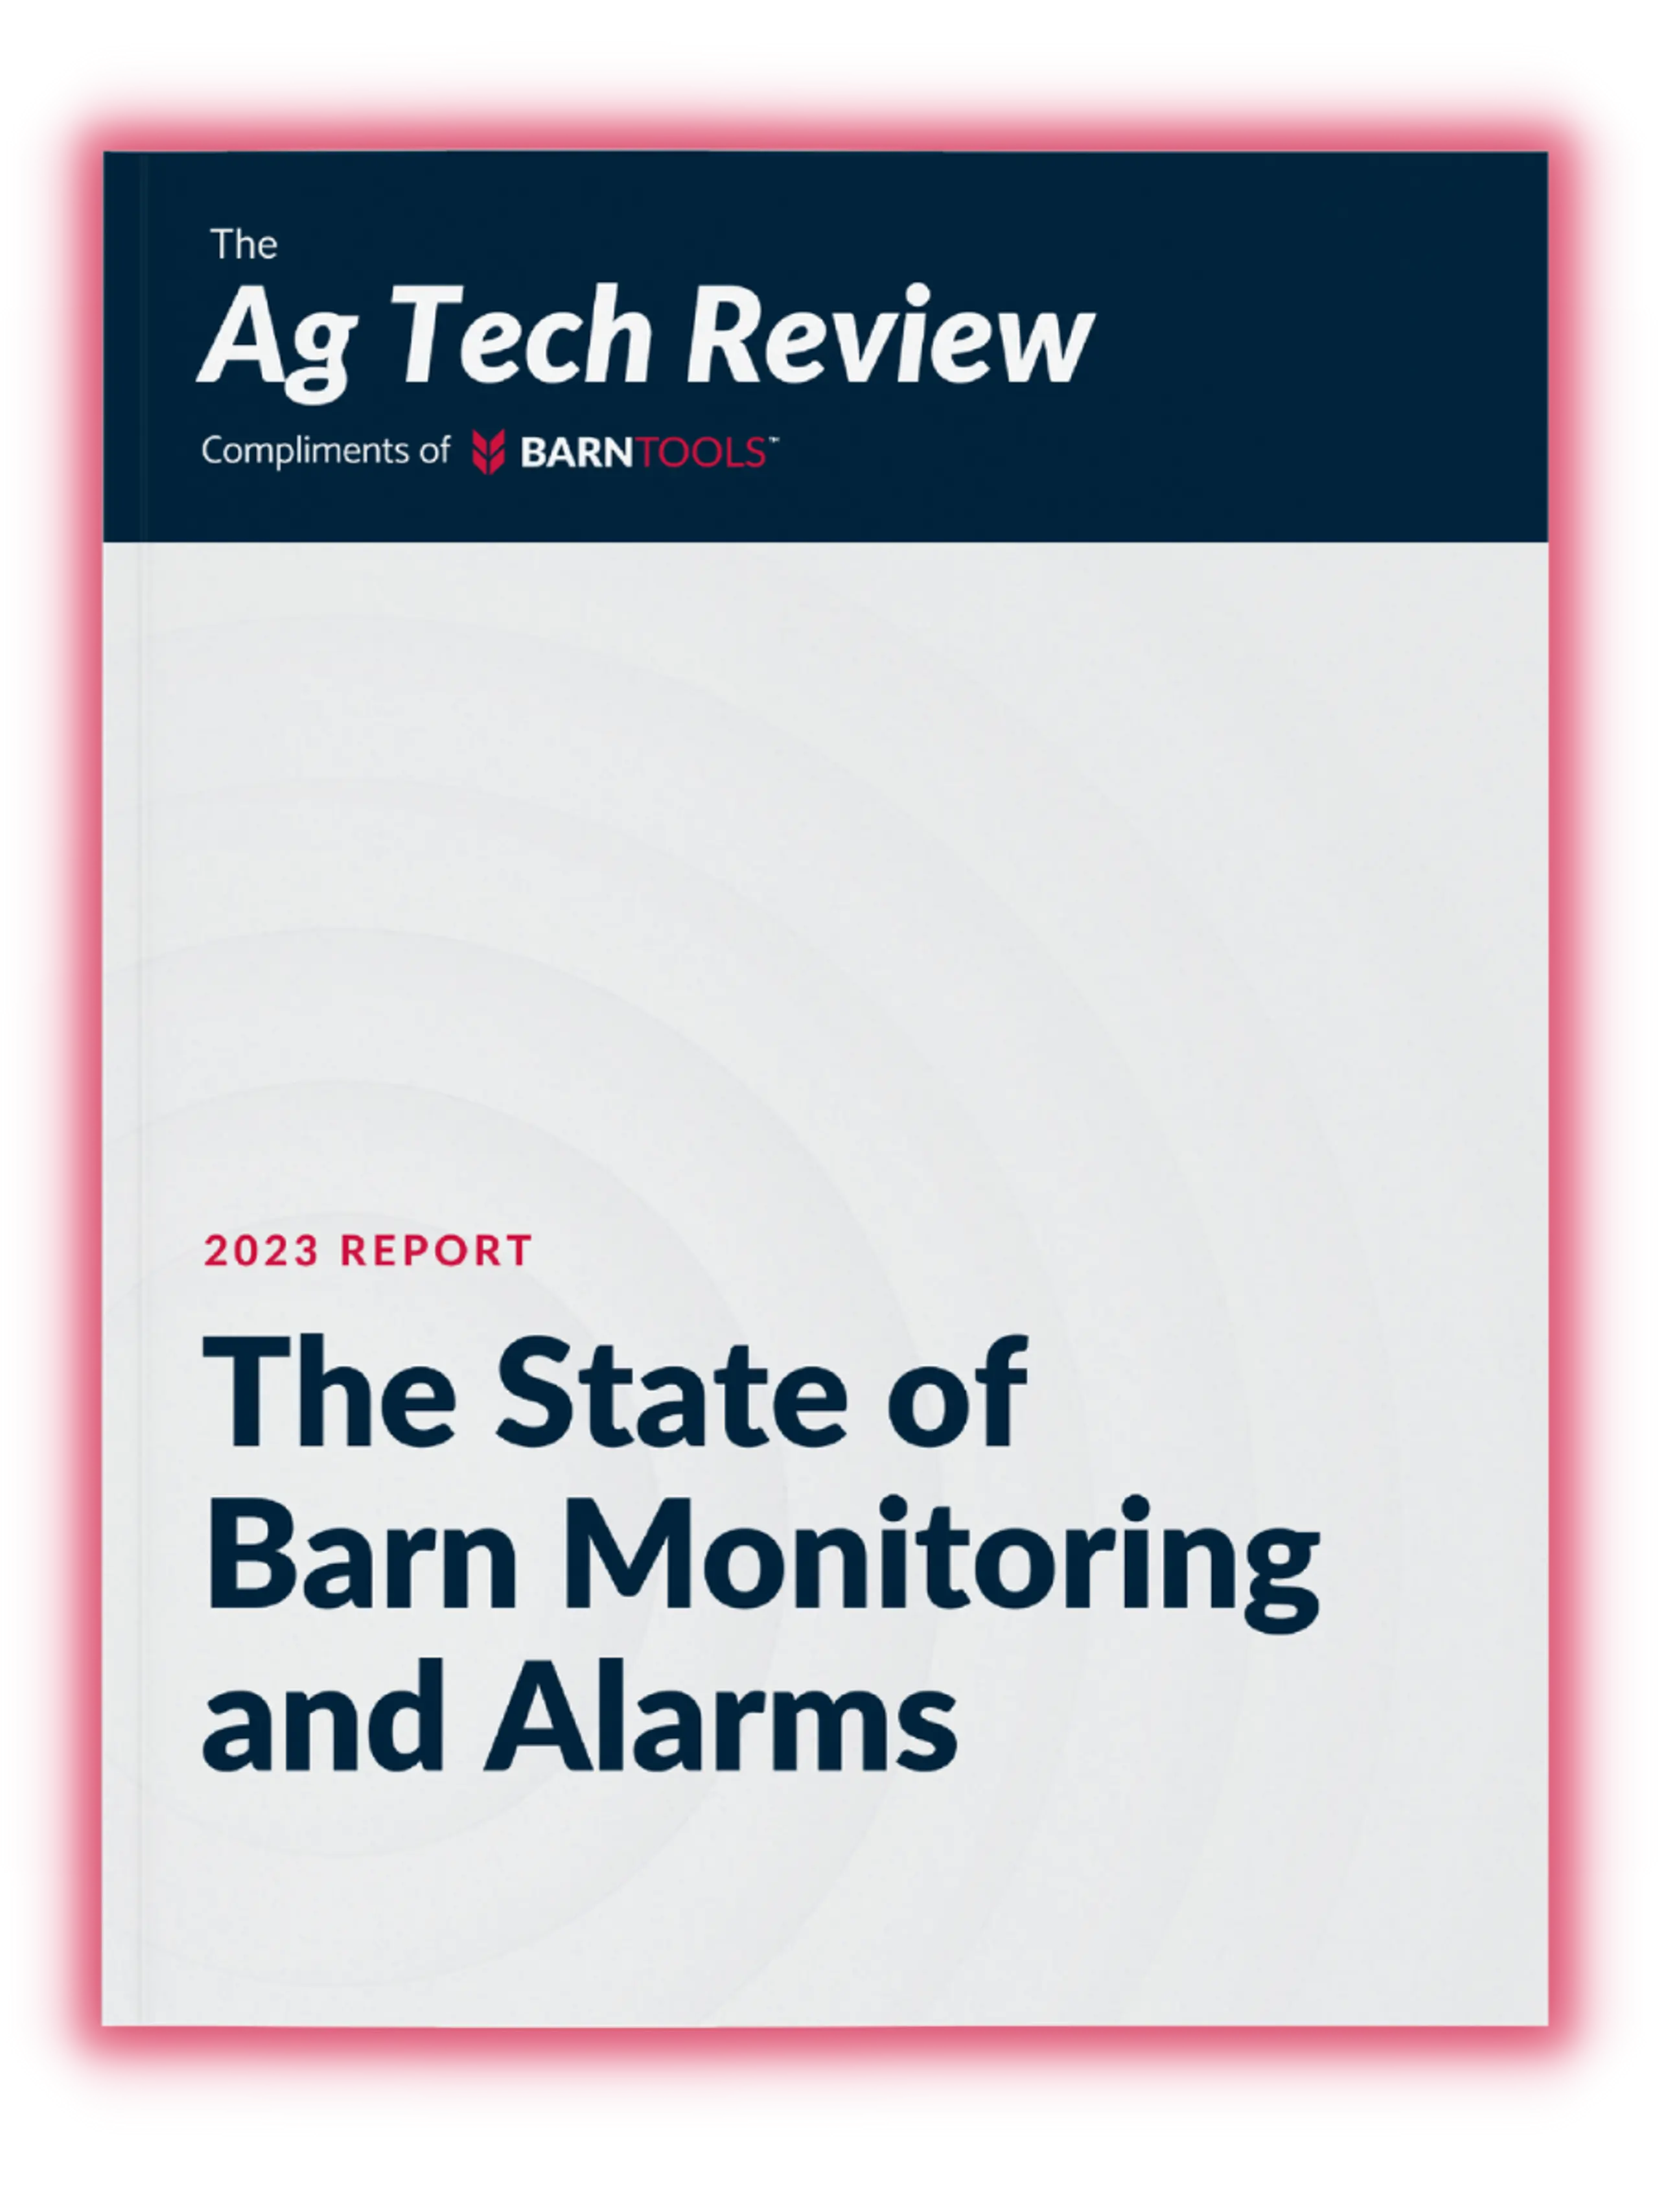 The State of Barn Monitoring and Alarms